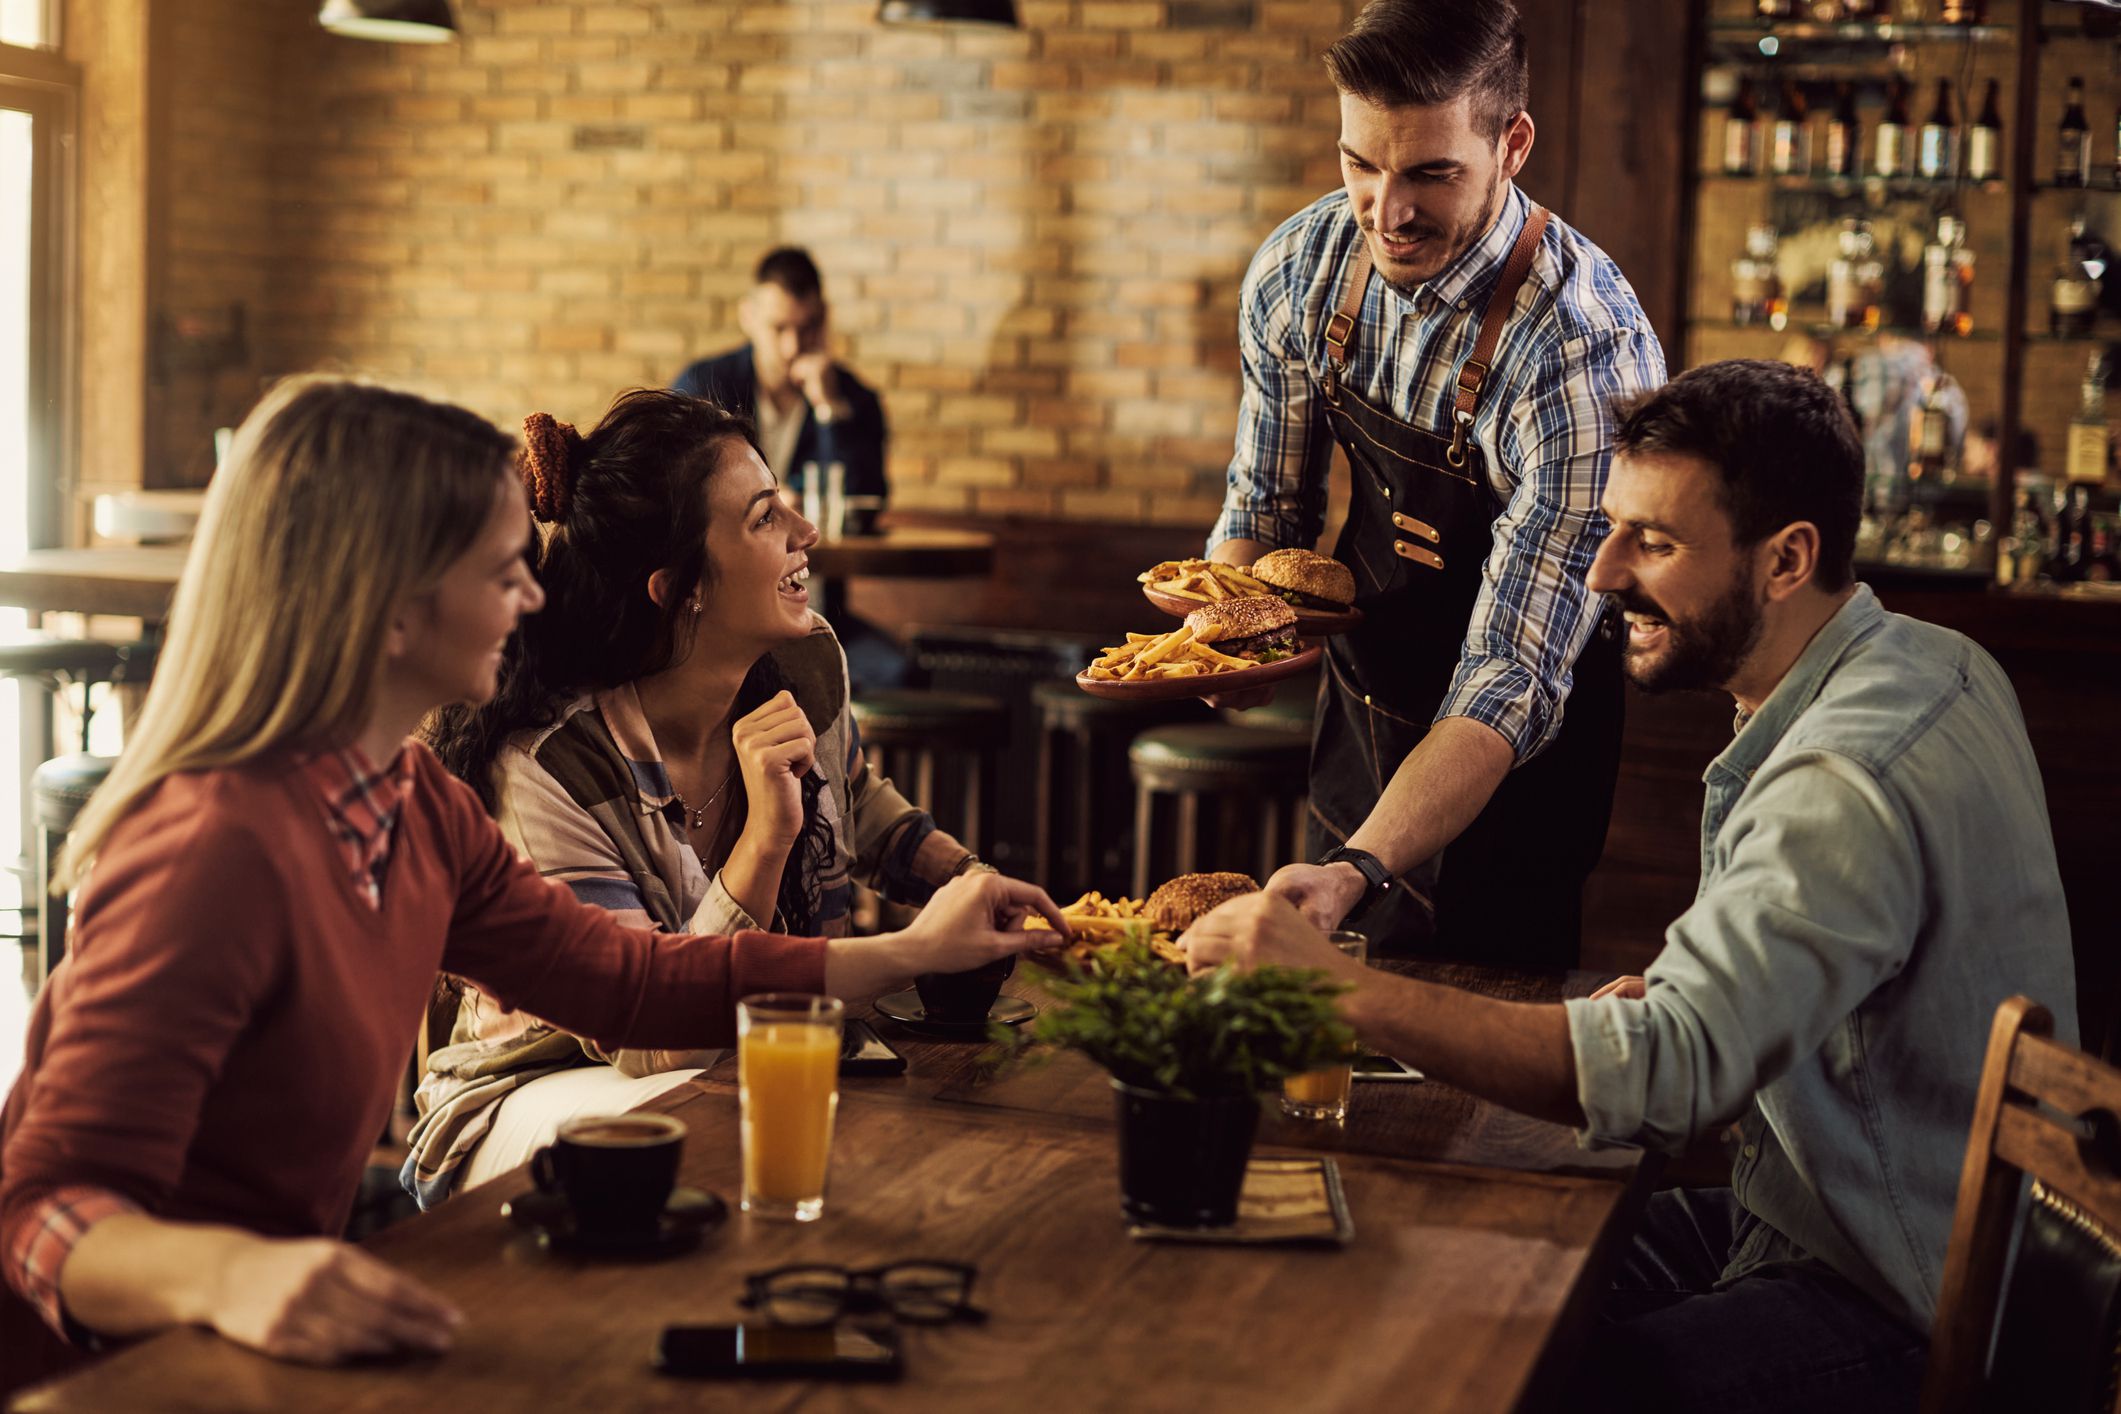 <p>Servers often have to rely heavily on tips, as their <a href="https://www.zippia.com/food-service-worker-jobs/salary/">base wage can be quite low</a>. For sit-down dining, tipping 15-20% of the total bill before taxes is standard practice. If you feel like the service was exceptional, you can always tip more. But generally, tipping 18% is considered pretty generous. For buffet settings, 10% is usually a fair amount. </p>